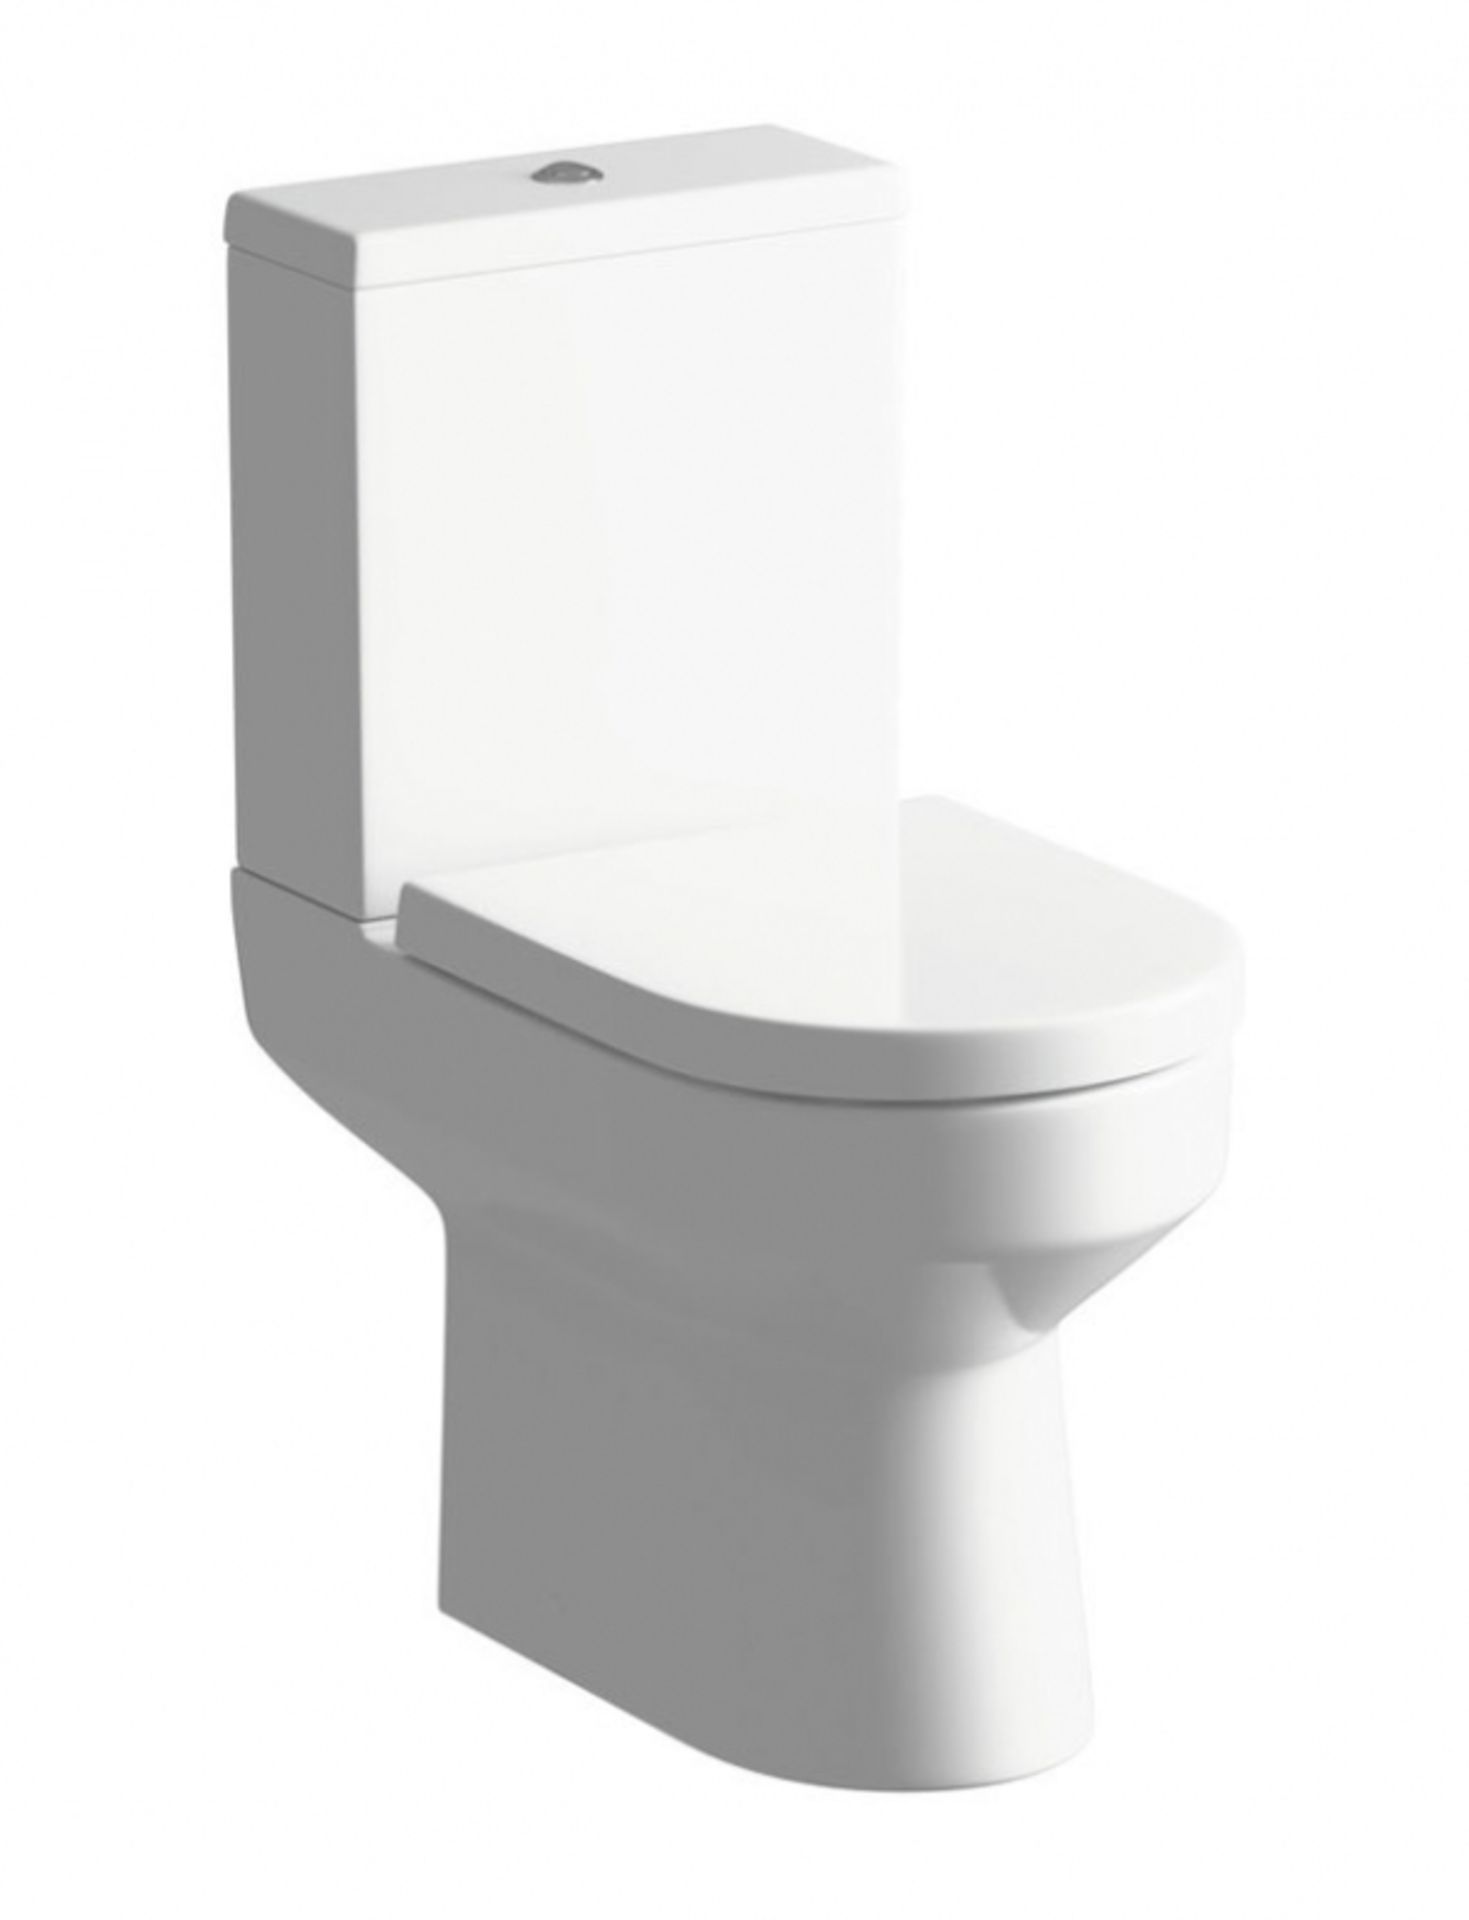 New & Boxed Lauruc Close Coupled WC Inc Soft Close Toilet Seat. RRP £495.00.Close Coupled WC ... New - Image 2 of 2